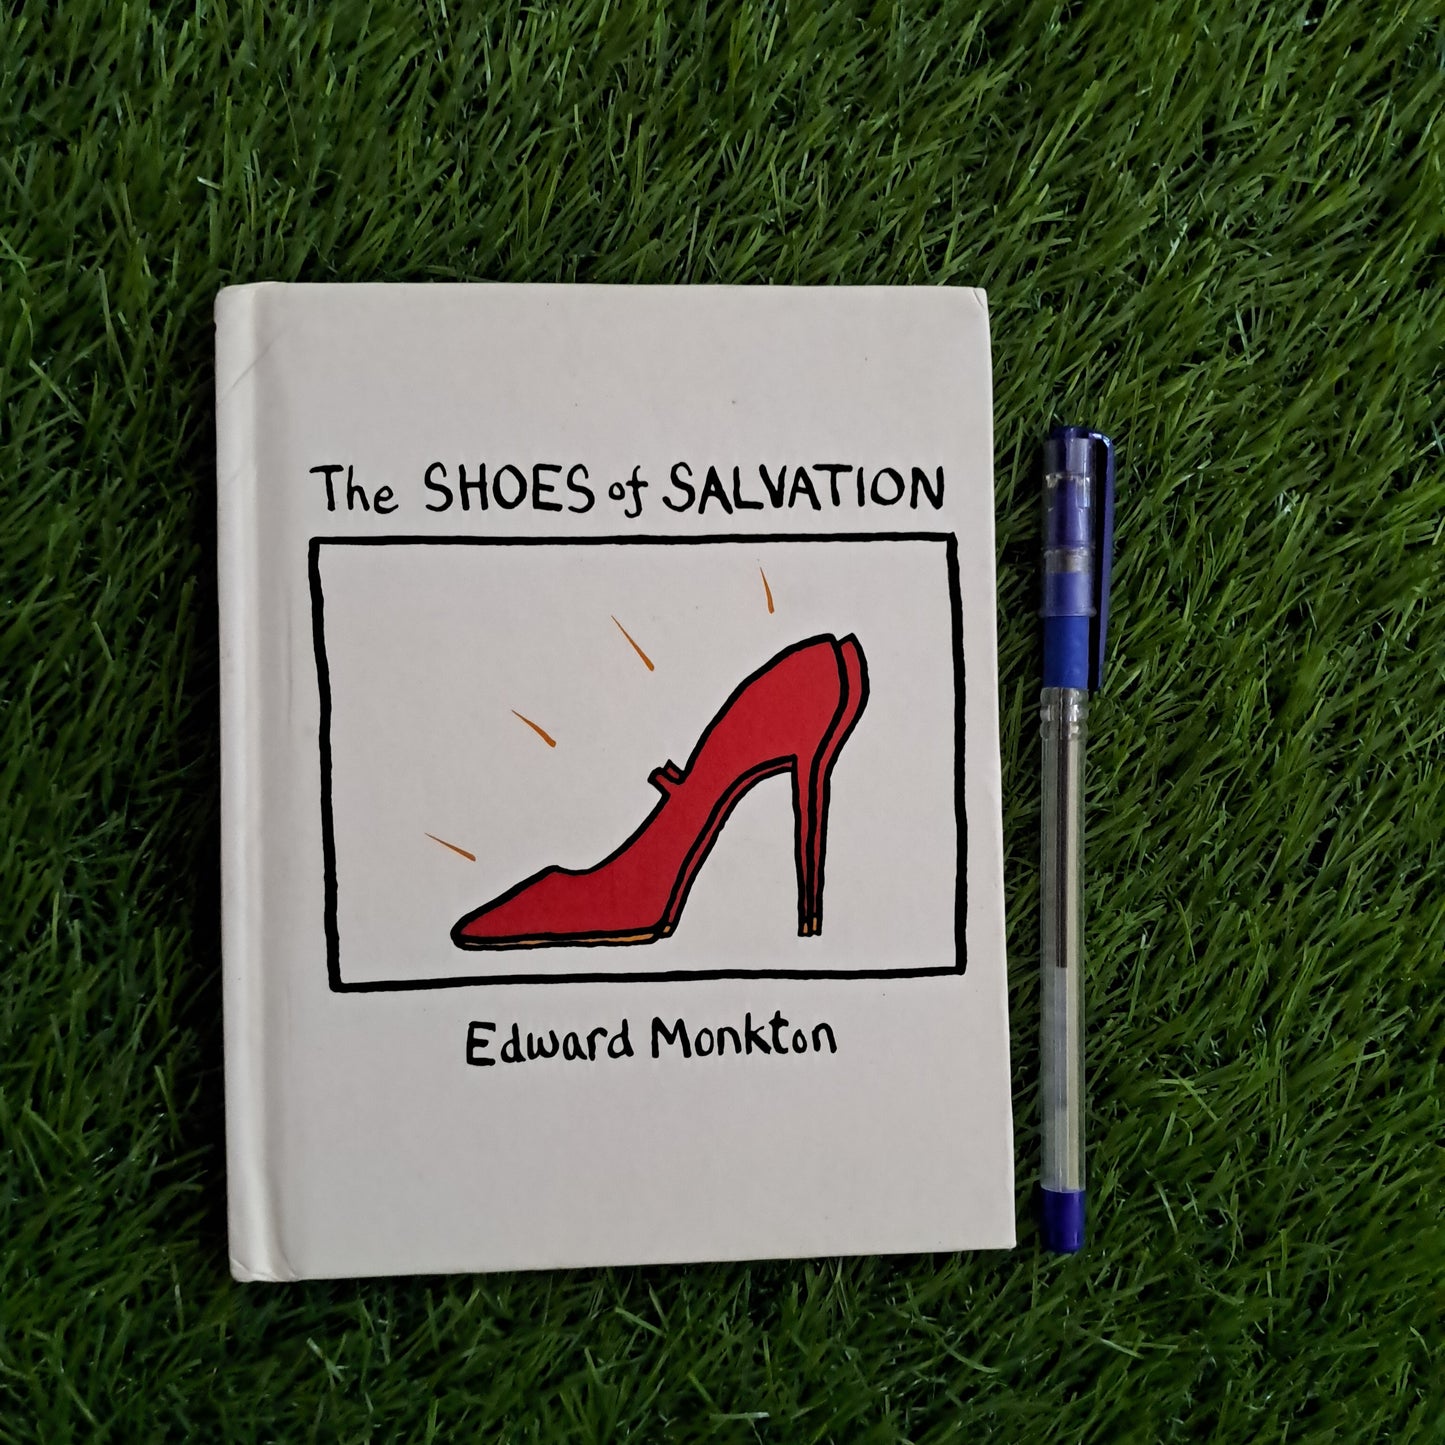 The SHOES of SALVATION